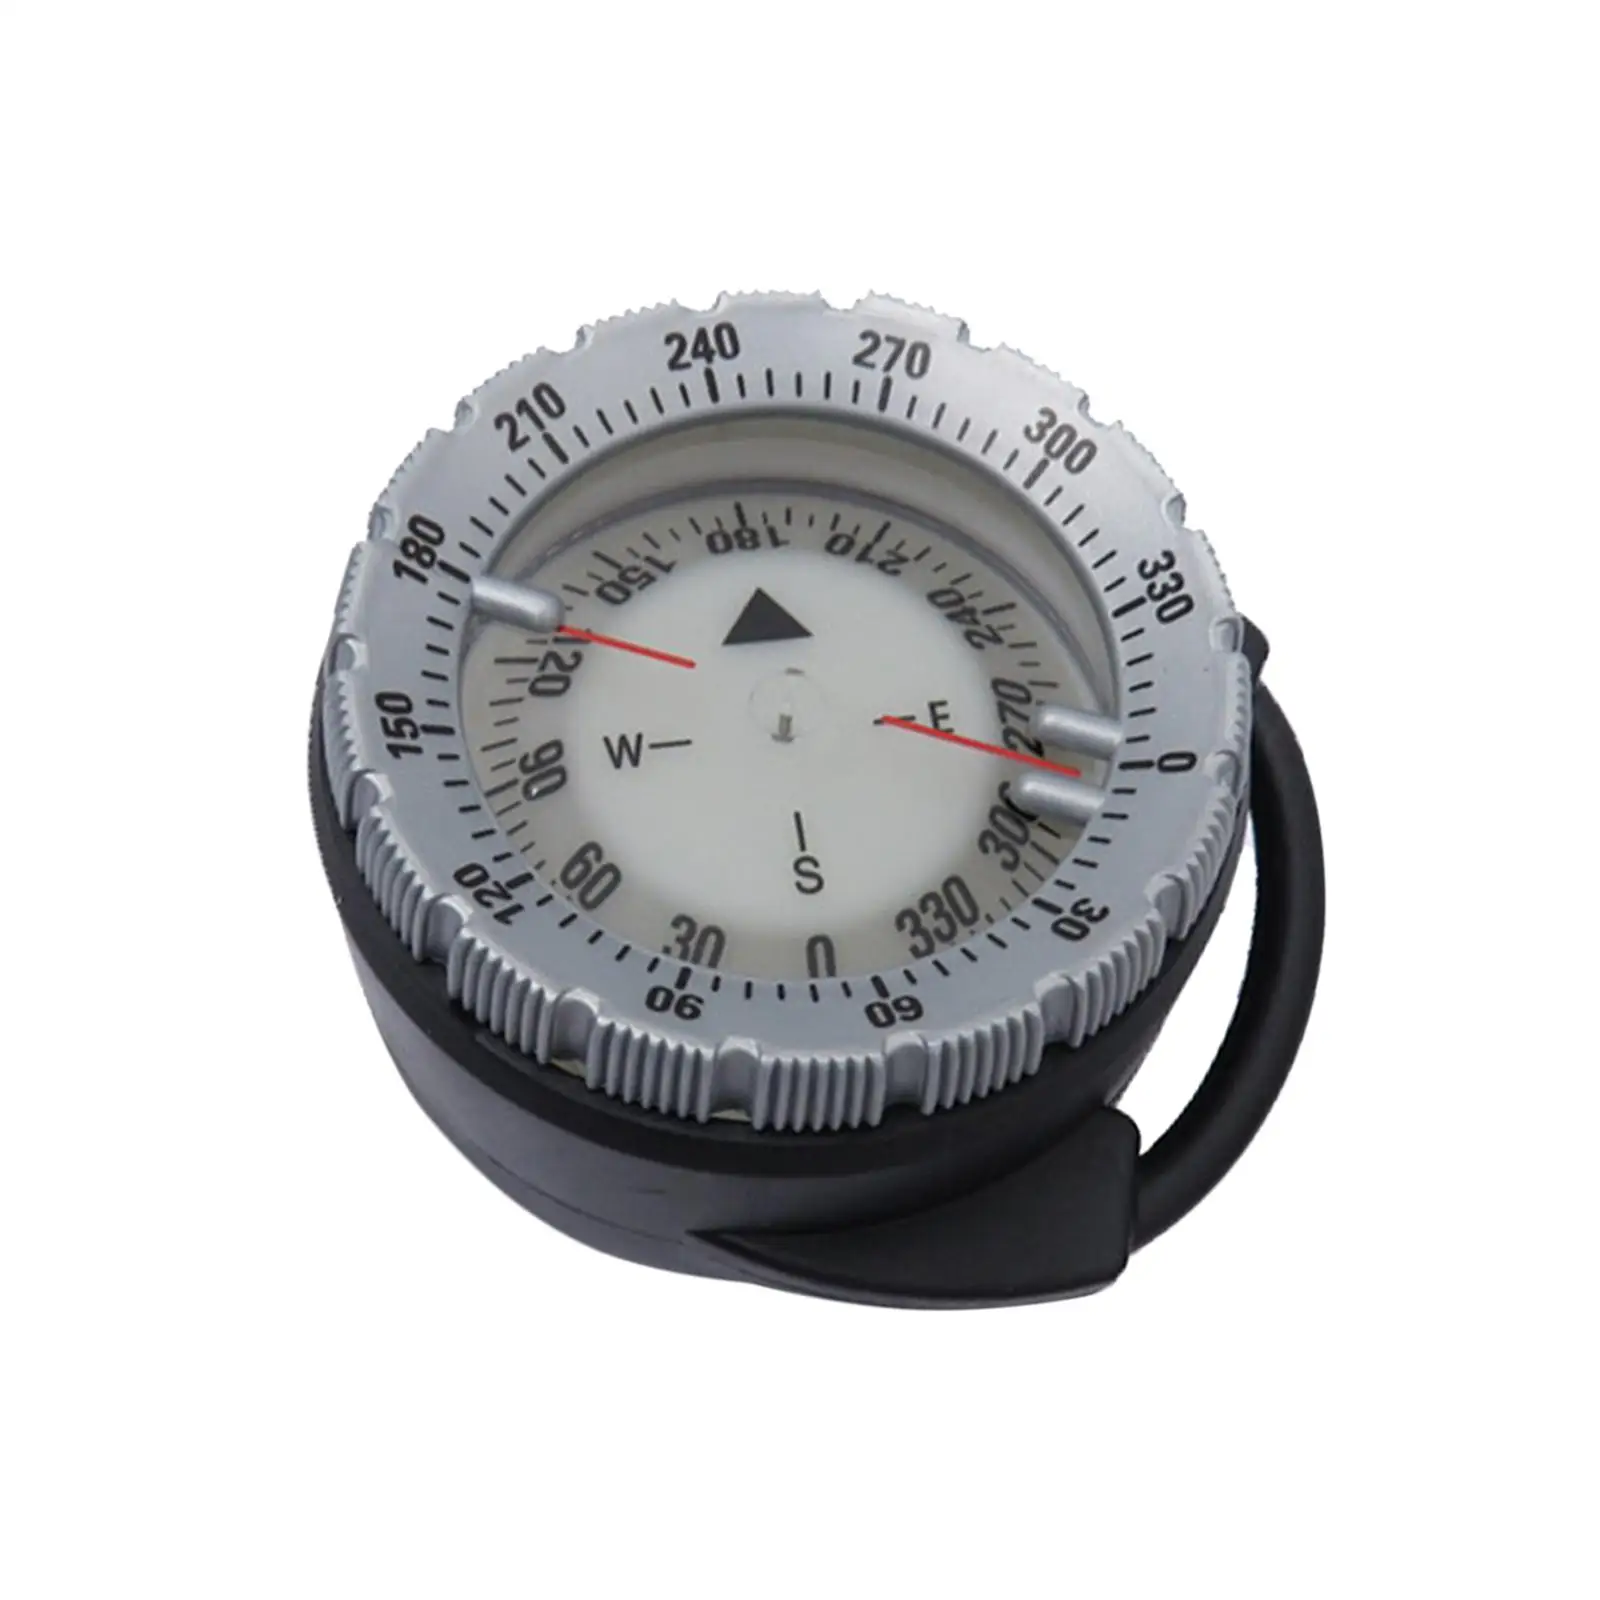 Camping Survival Compass Classic Pocket Compass for Hiking Climbing